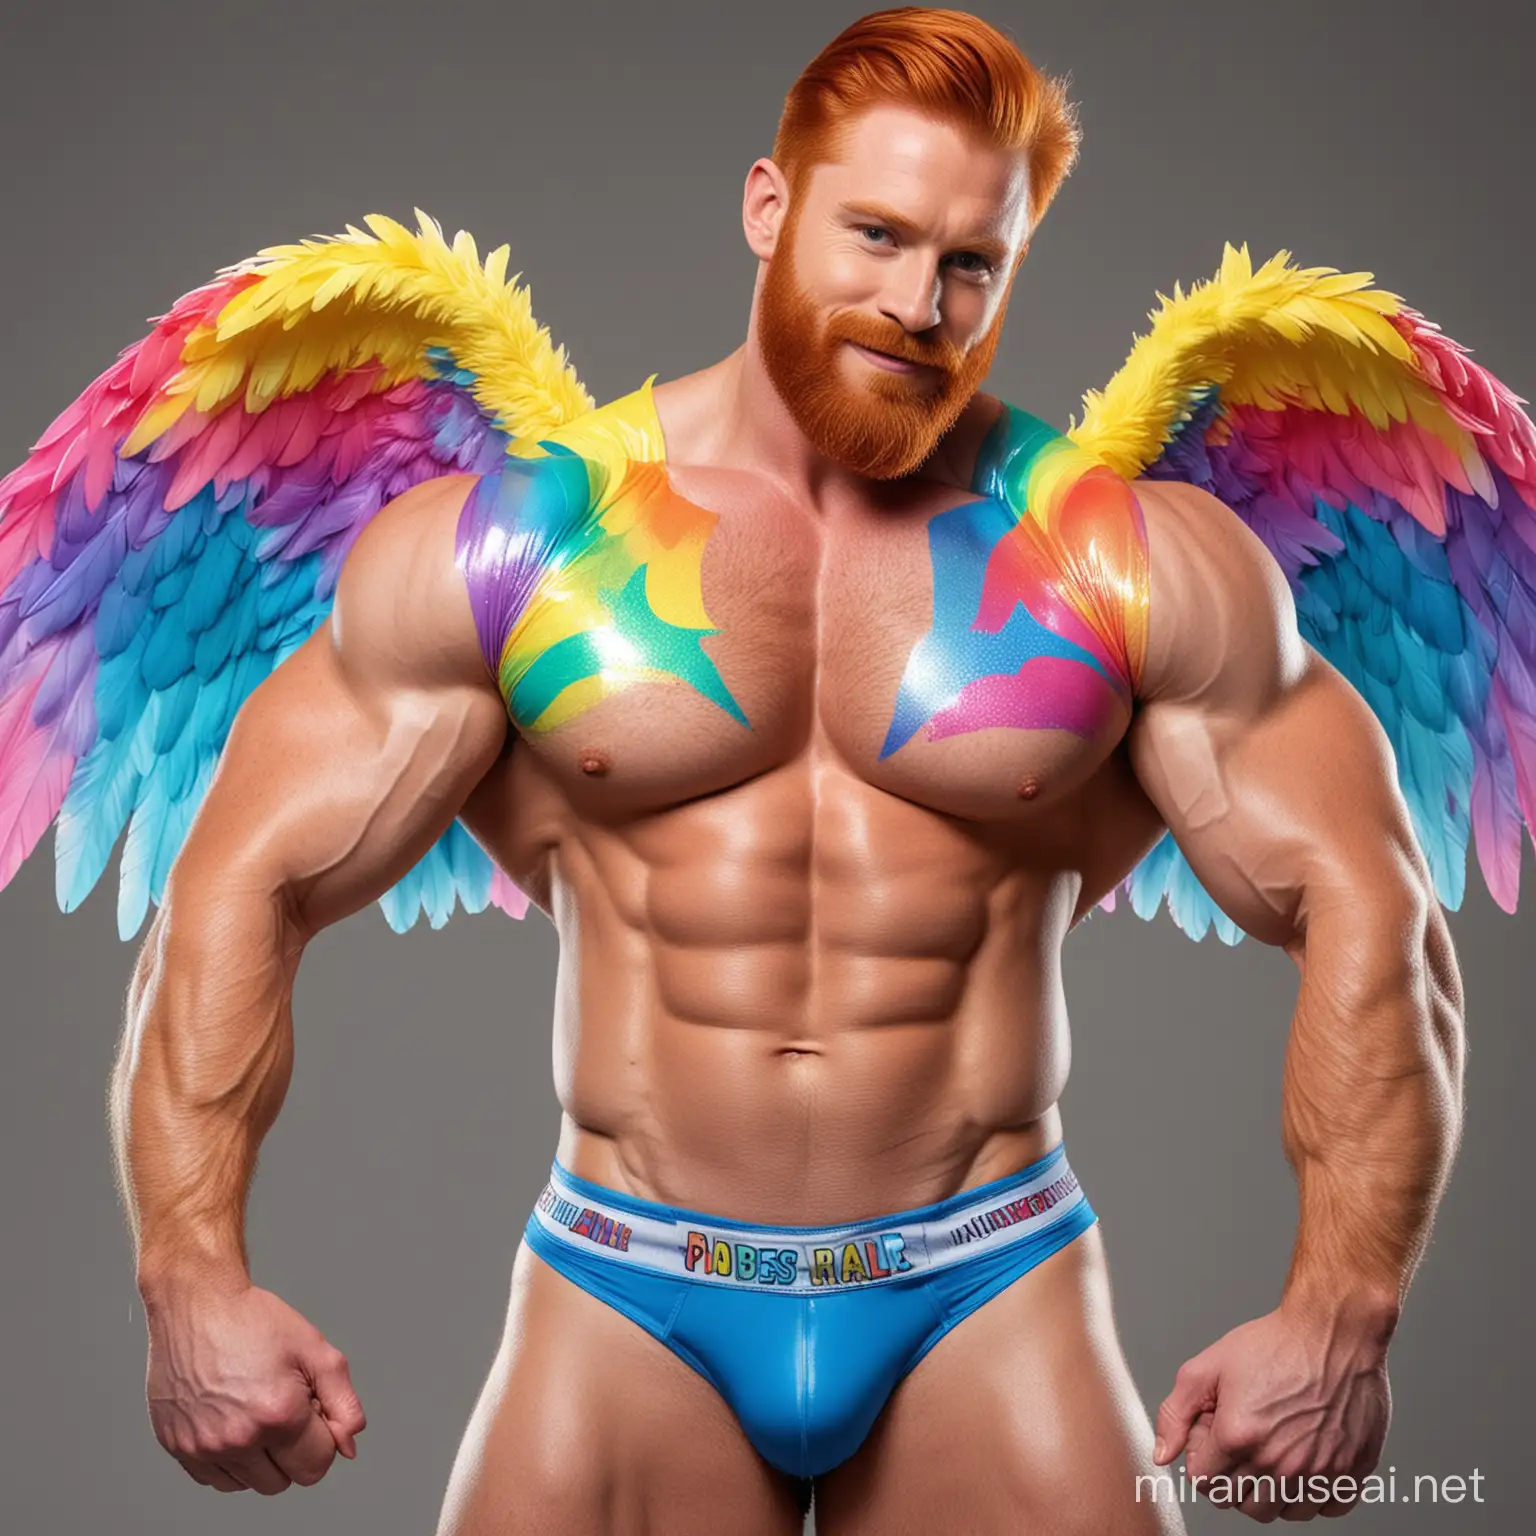 Muscular Redhead Bodybuilder Flexing with Rainbow Eagle Wings Jacket and Doraemon